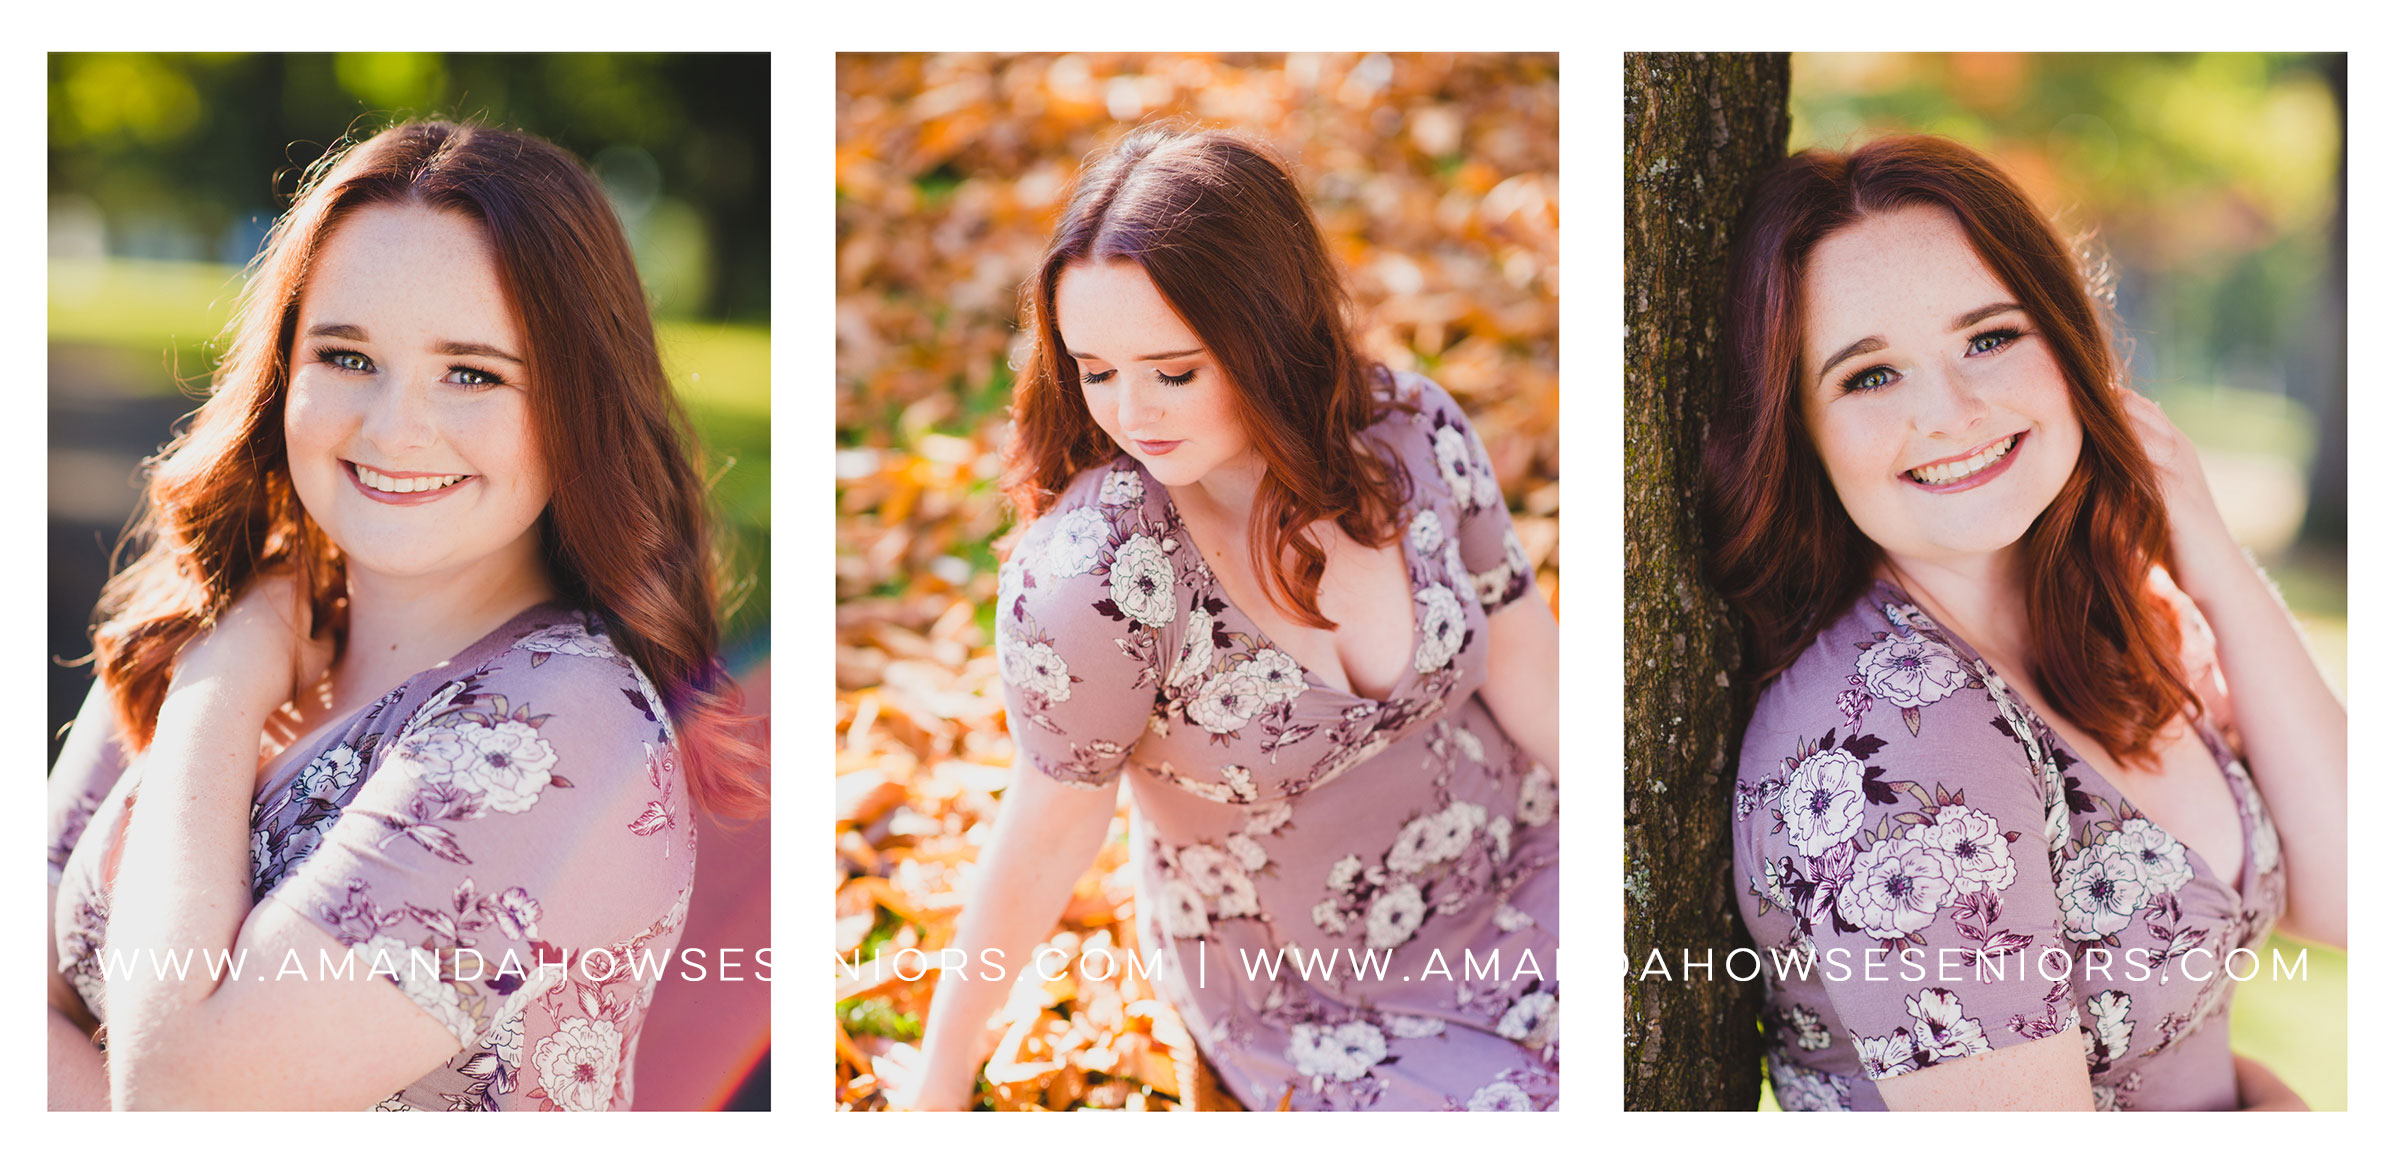 High school senior portraits at Wright Park in Tacoma in the fall leaves.